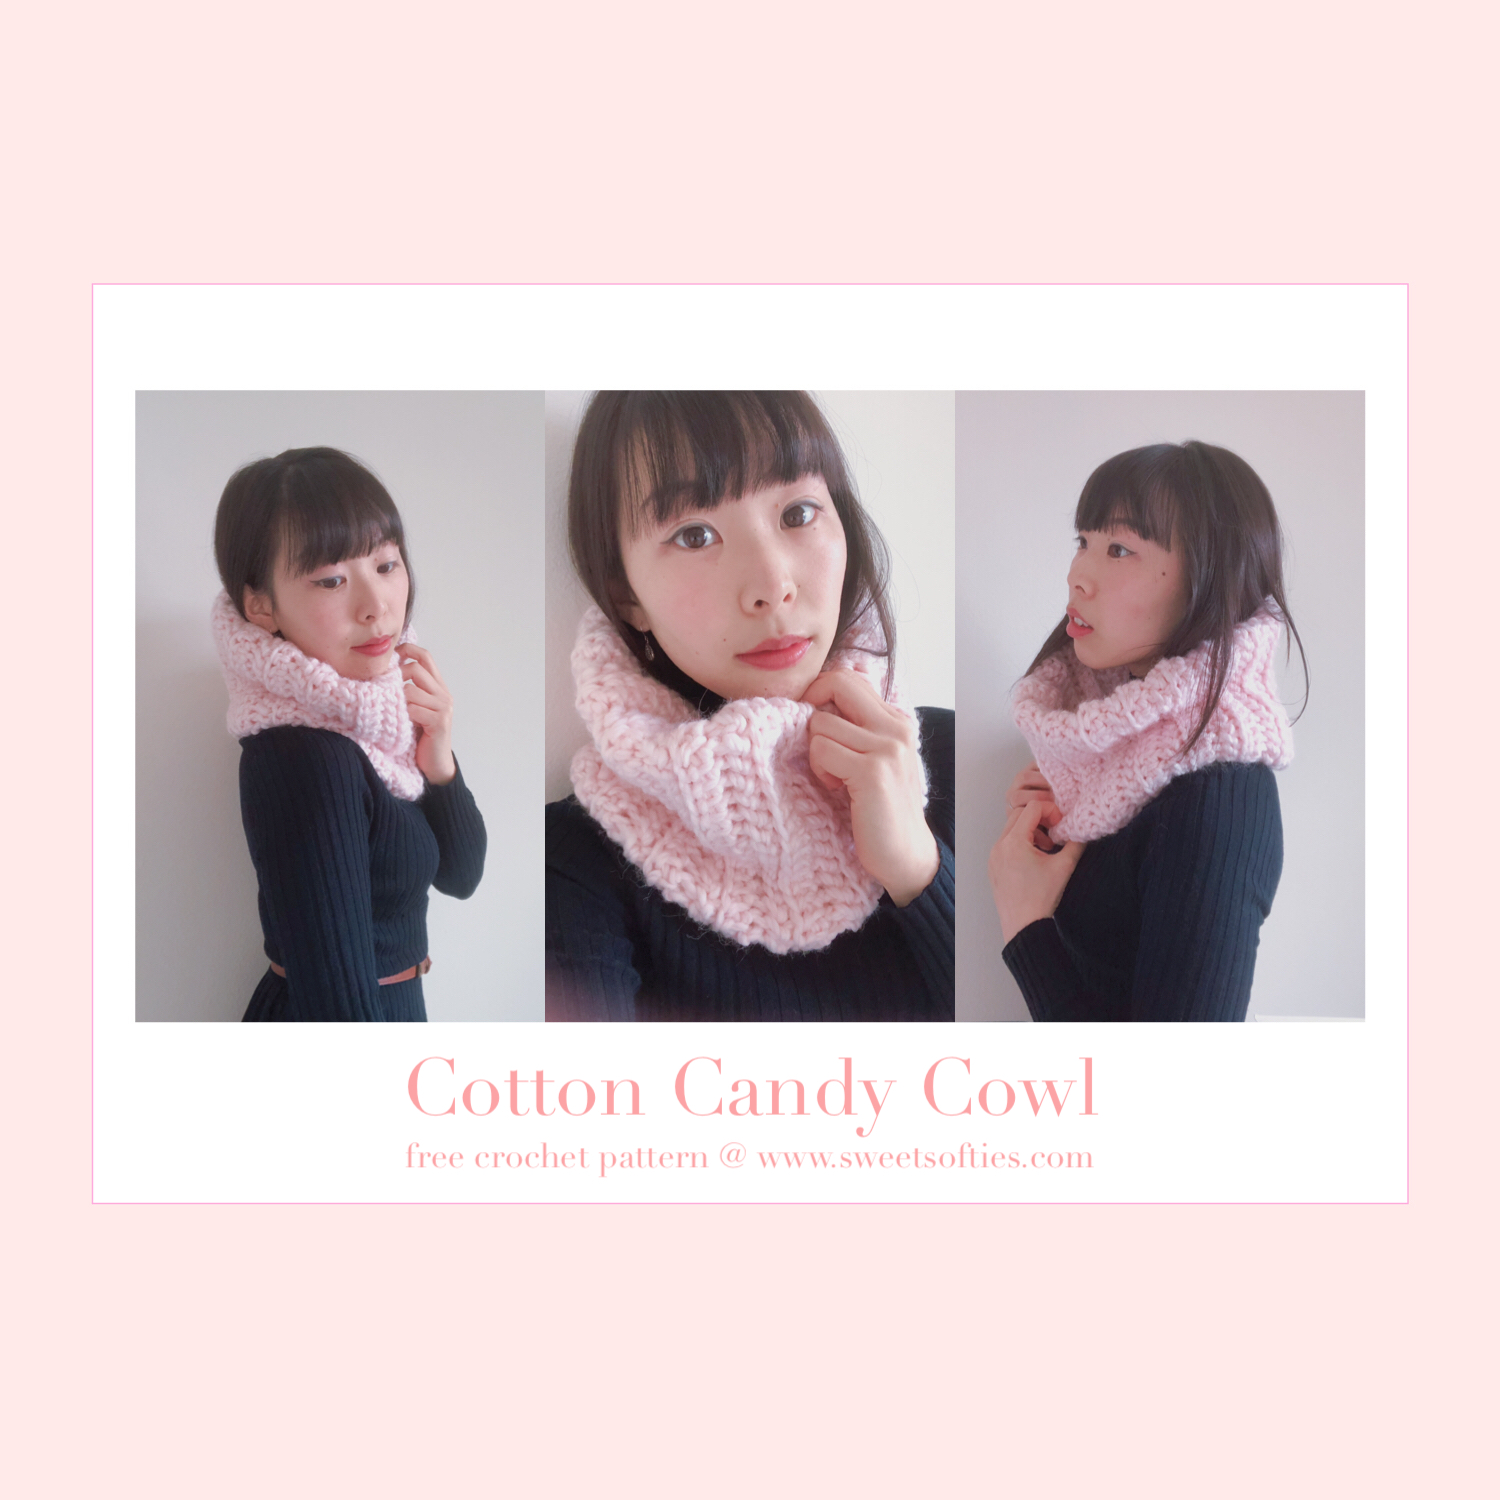 https://www.sweetsofties.com/2018/11/cotton-candy-cowl.html